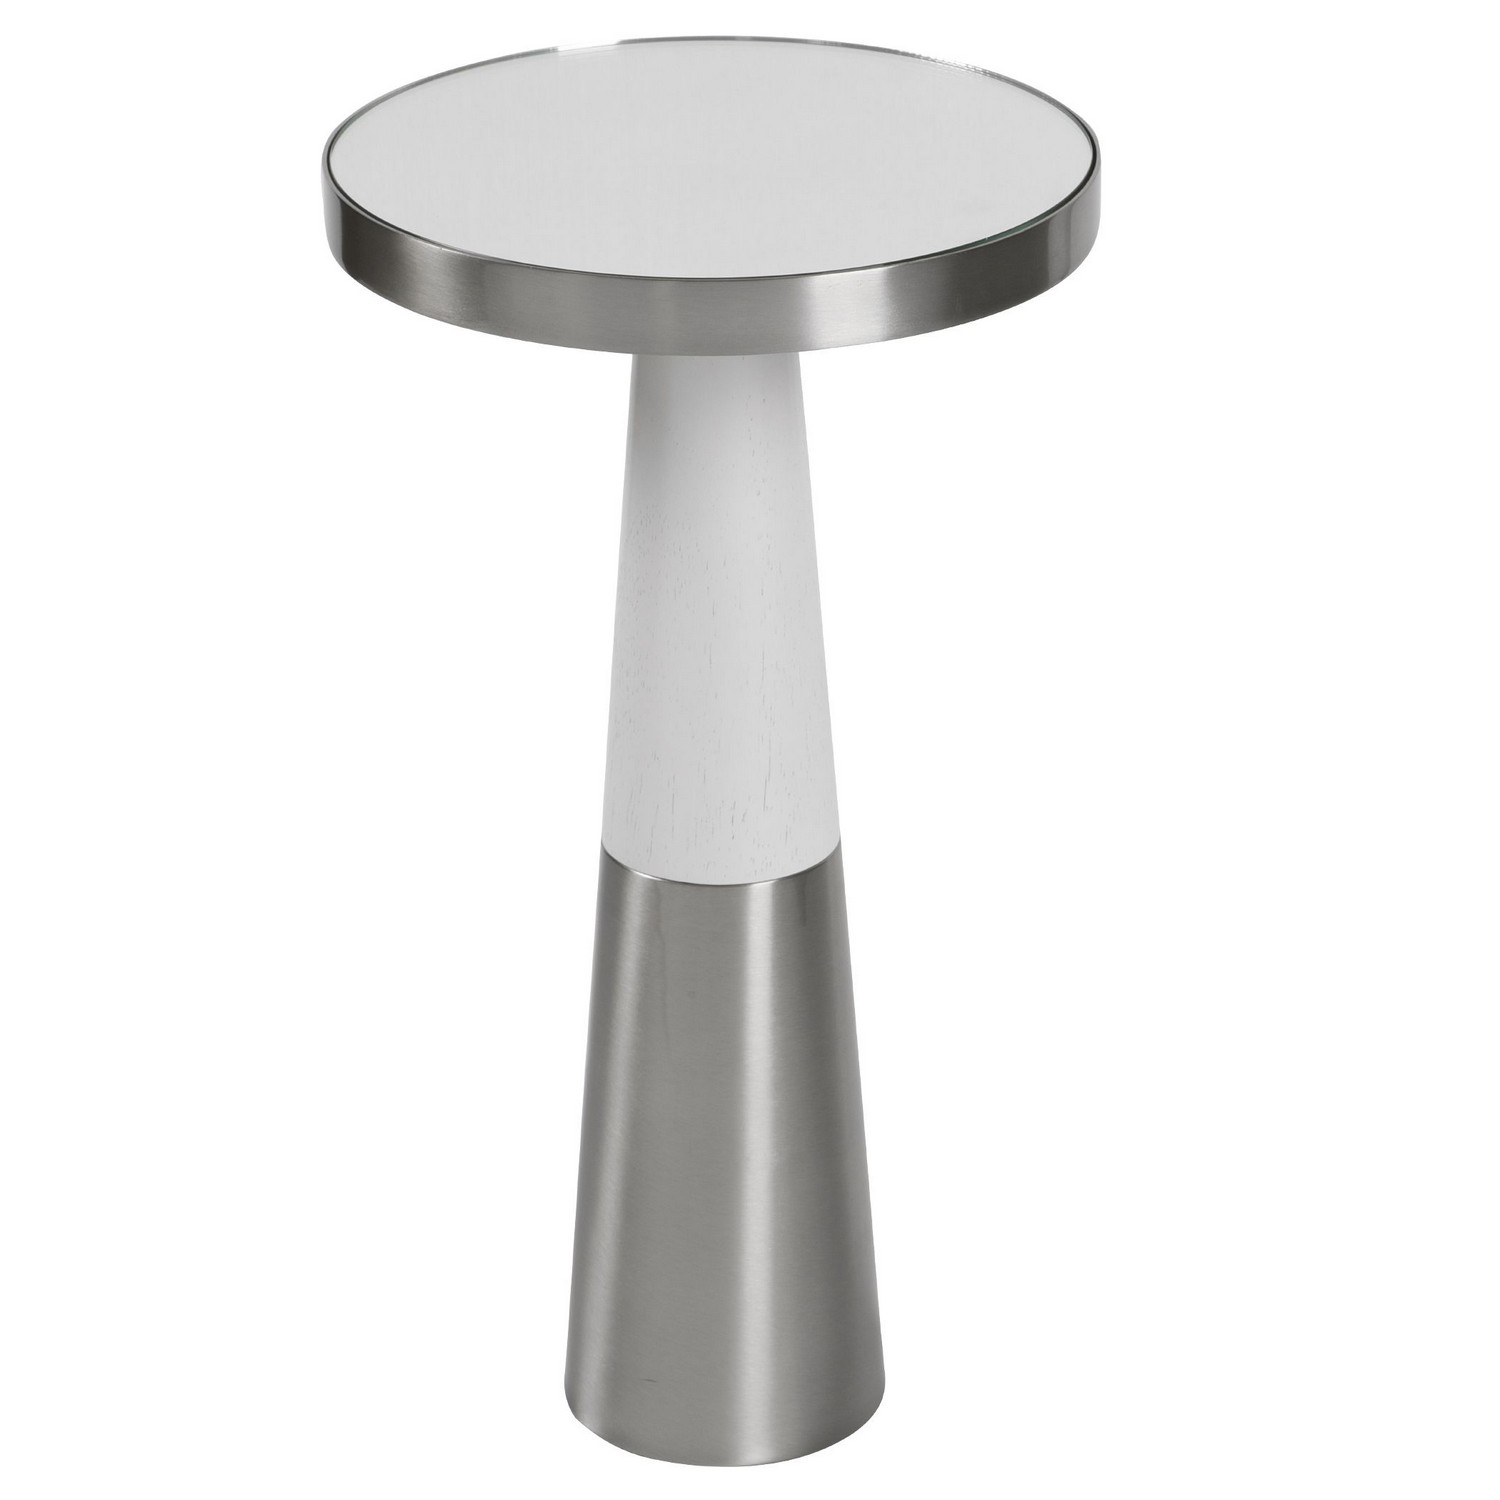 Uttermost Fortier Accent Table - Nickel